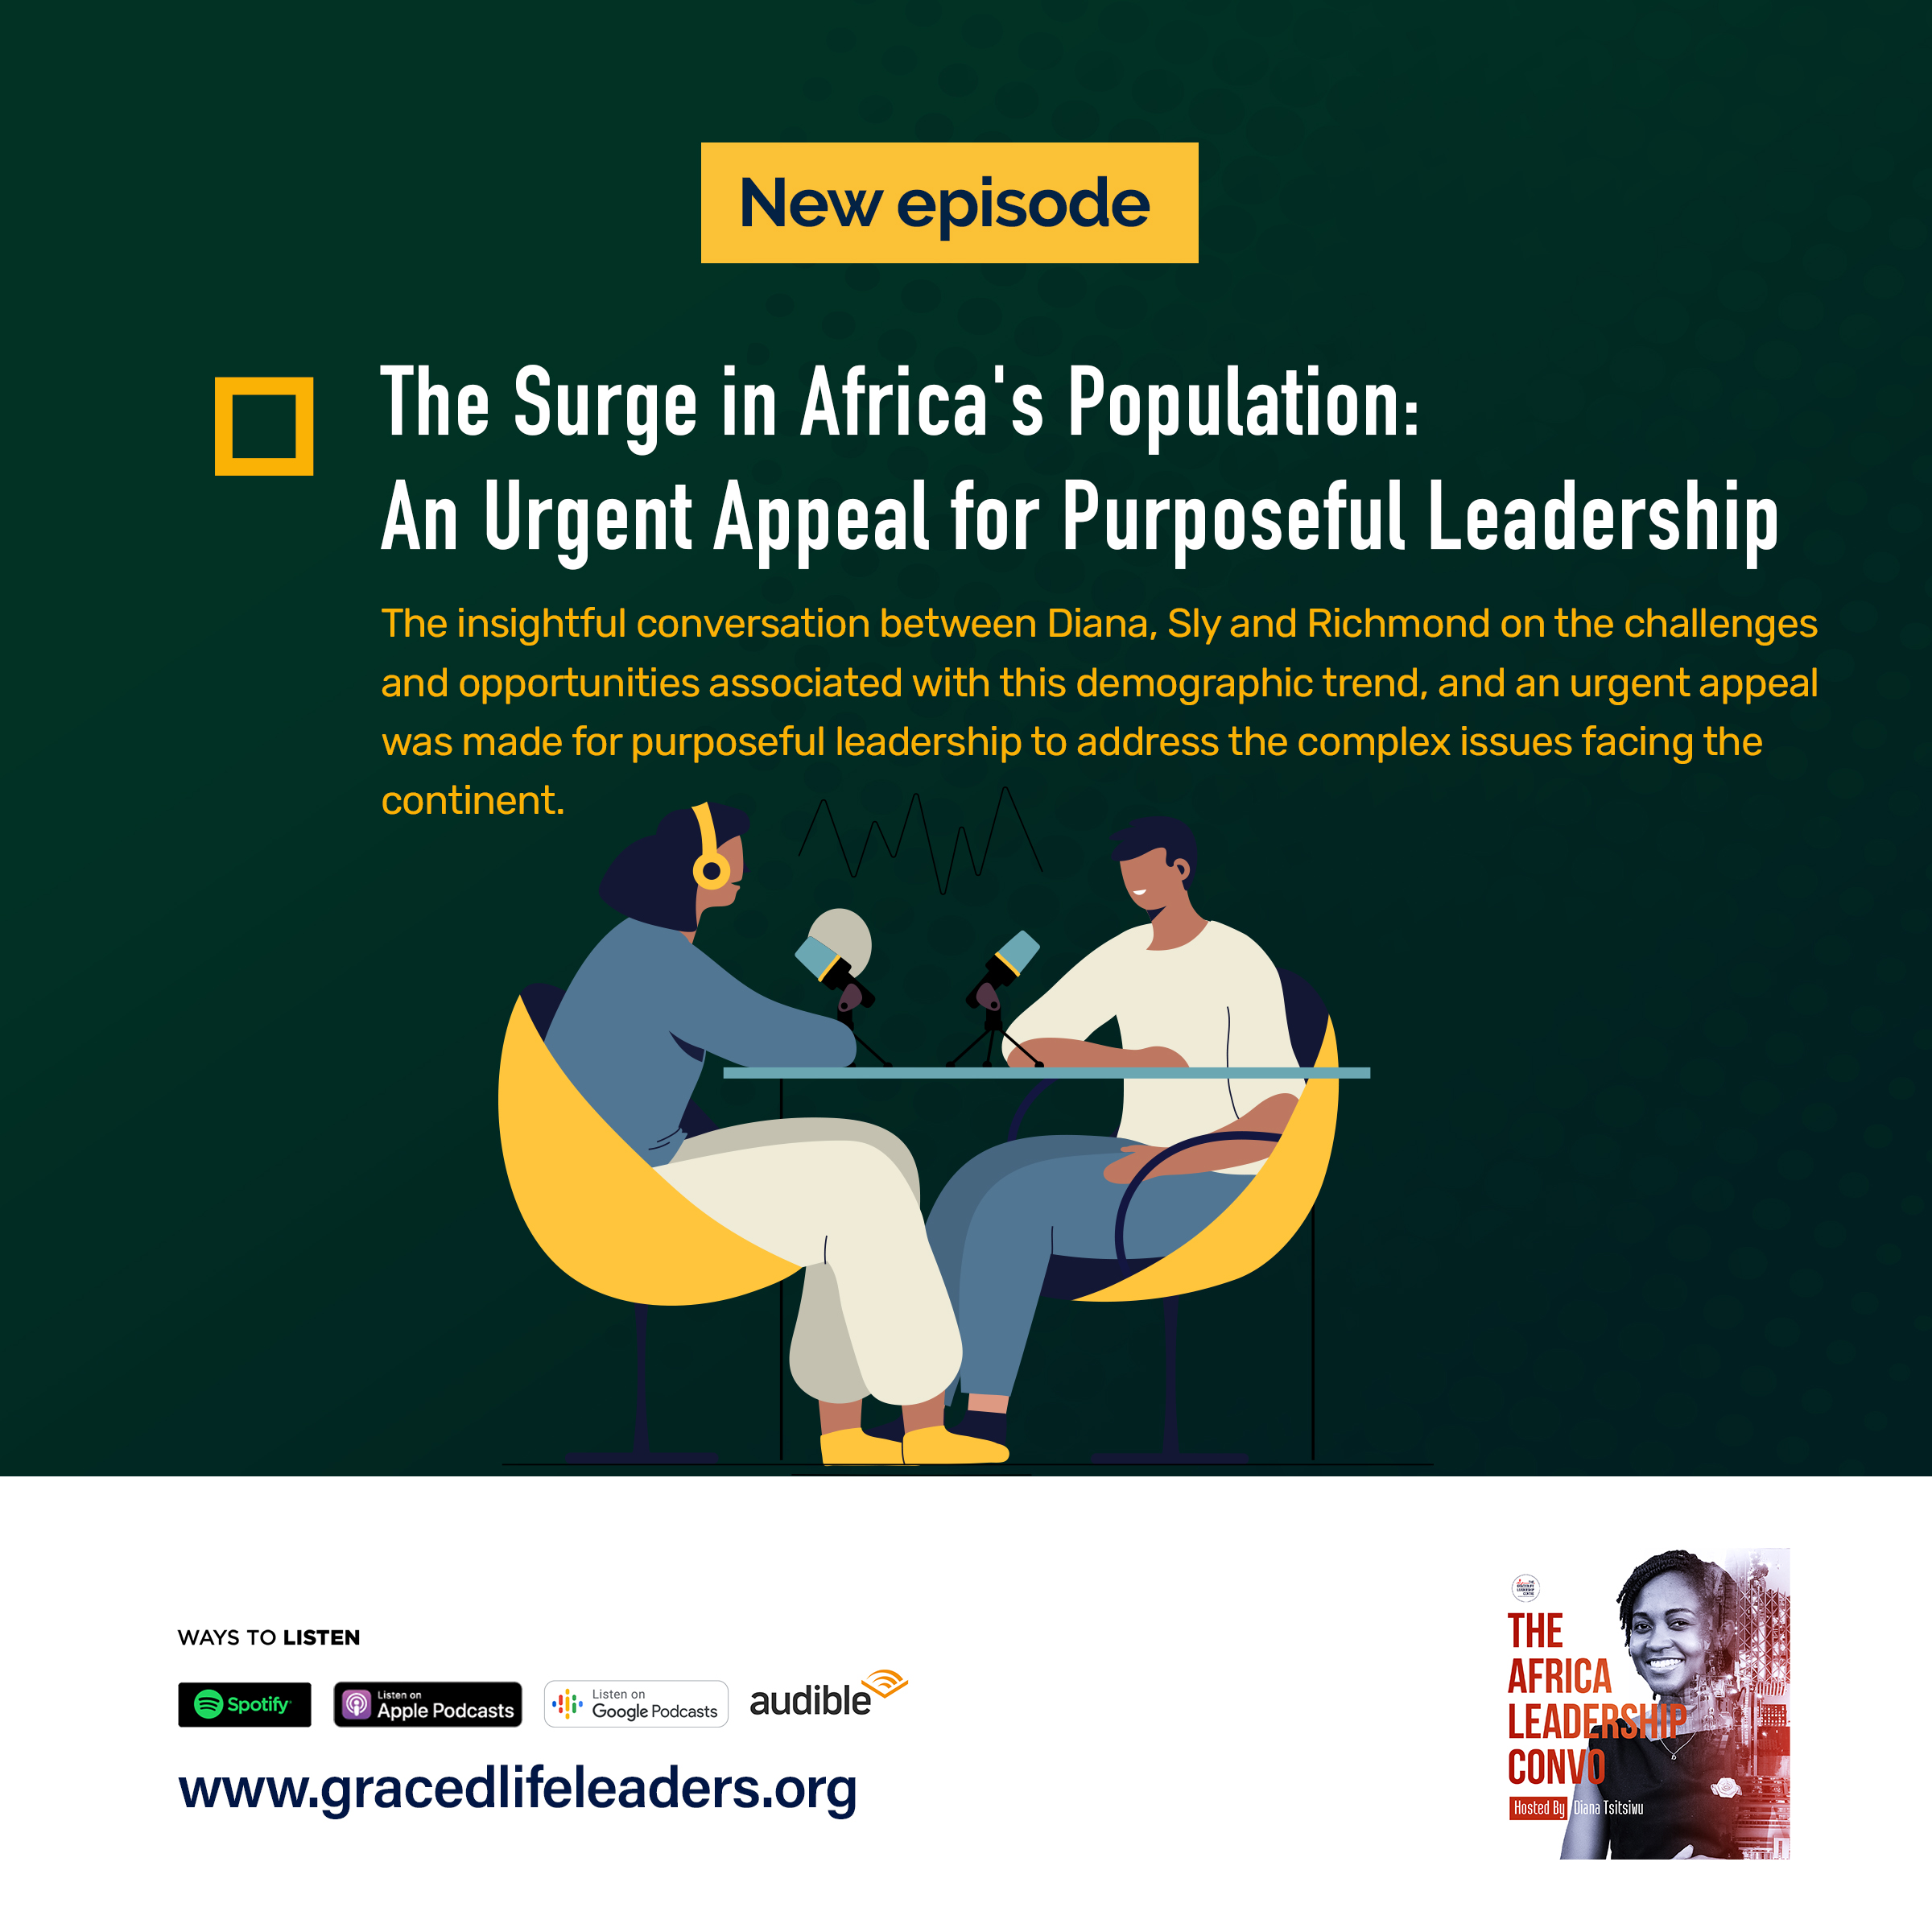 The Surge in Africa's Population: An Urgent Appeal for Purposeful Leadership